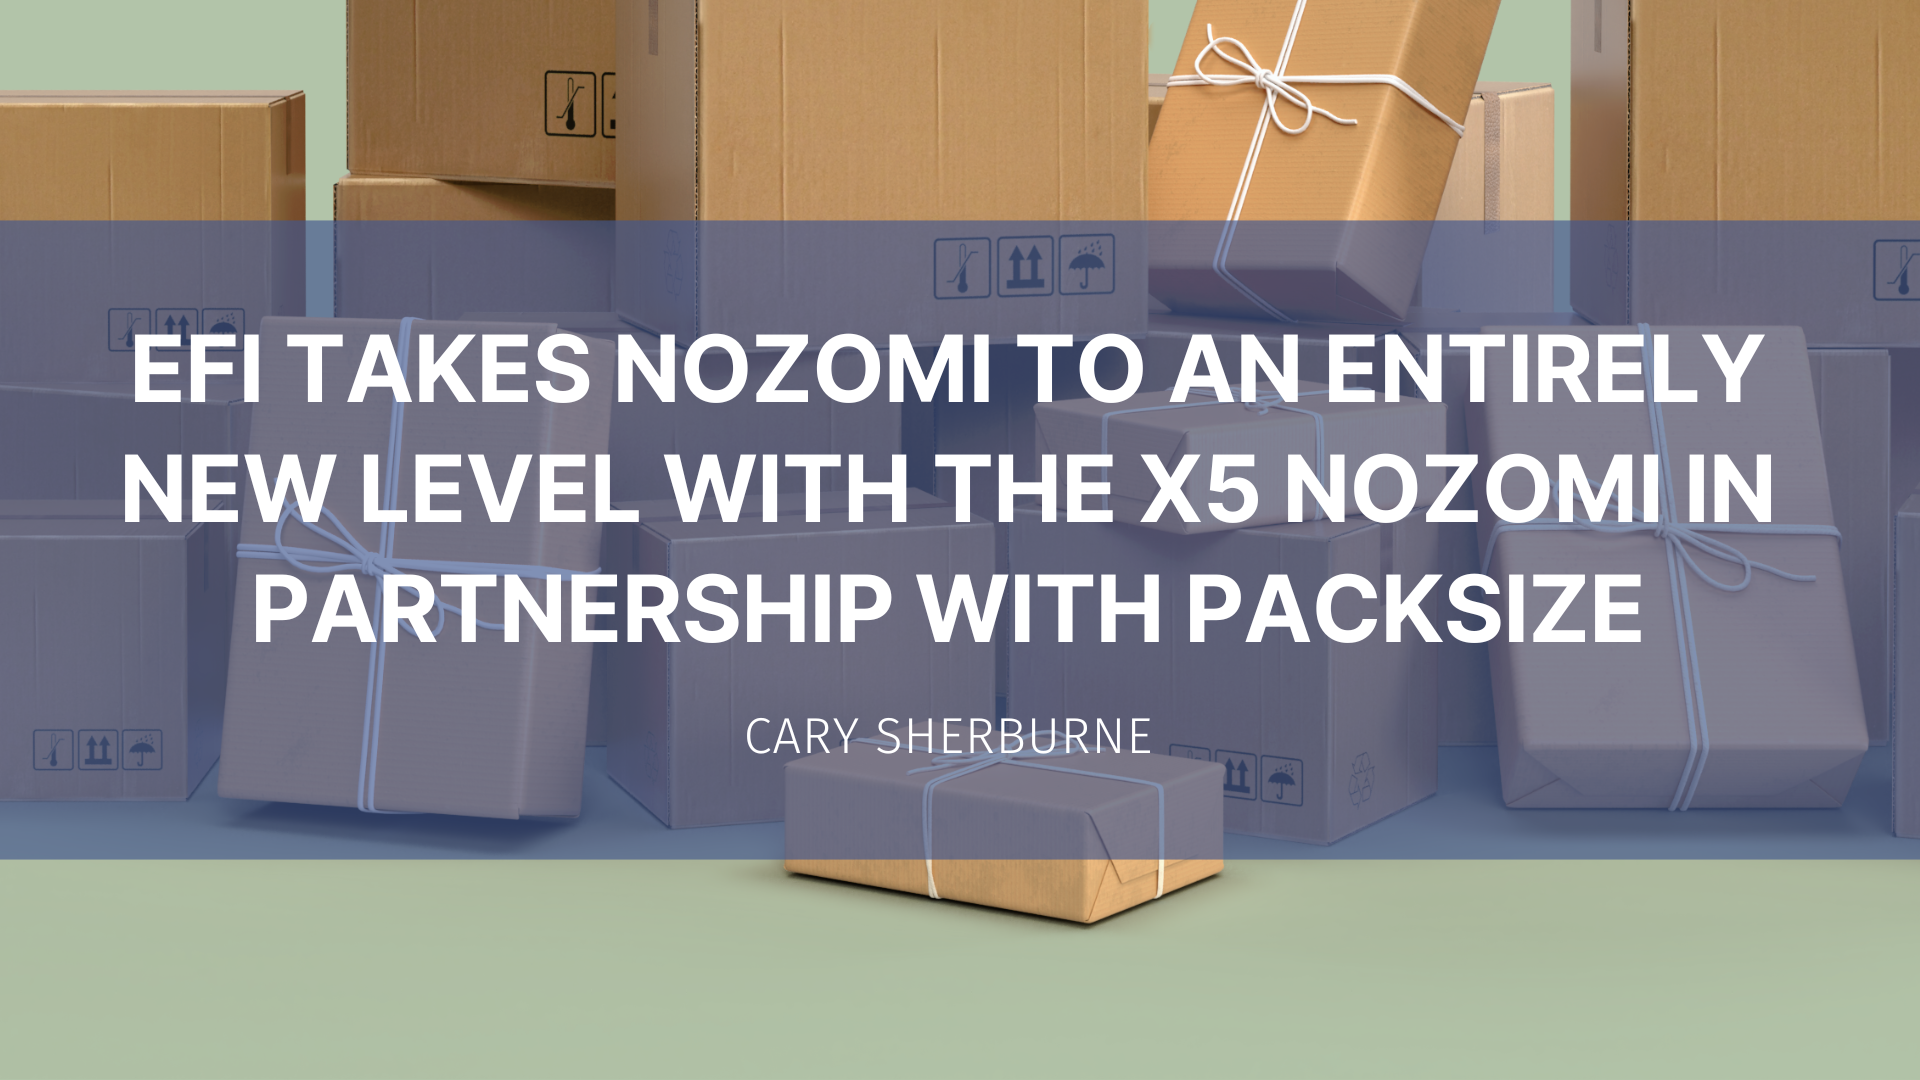 Featured image for “EFI Takes Nozomi to an Entirely New Level with the X5 Nozomi in Partnership with Packsize”